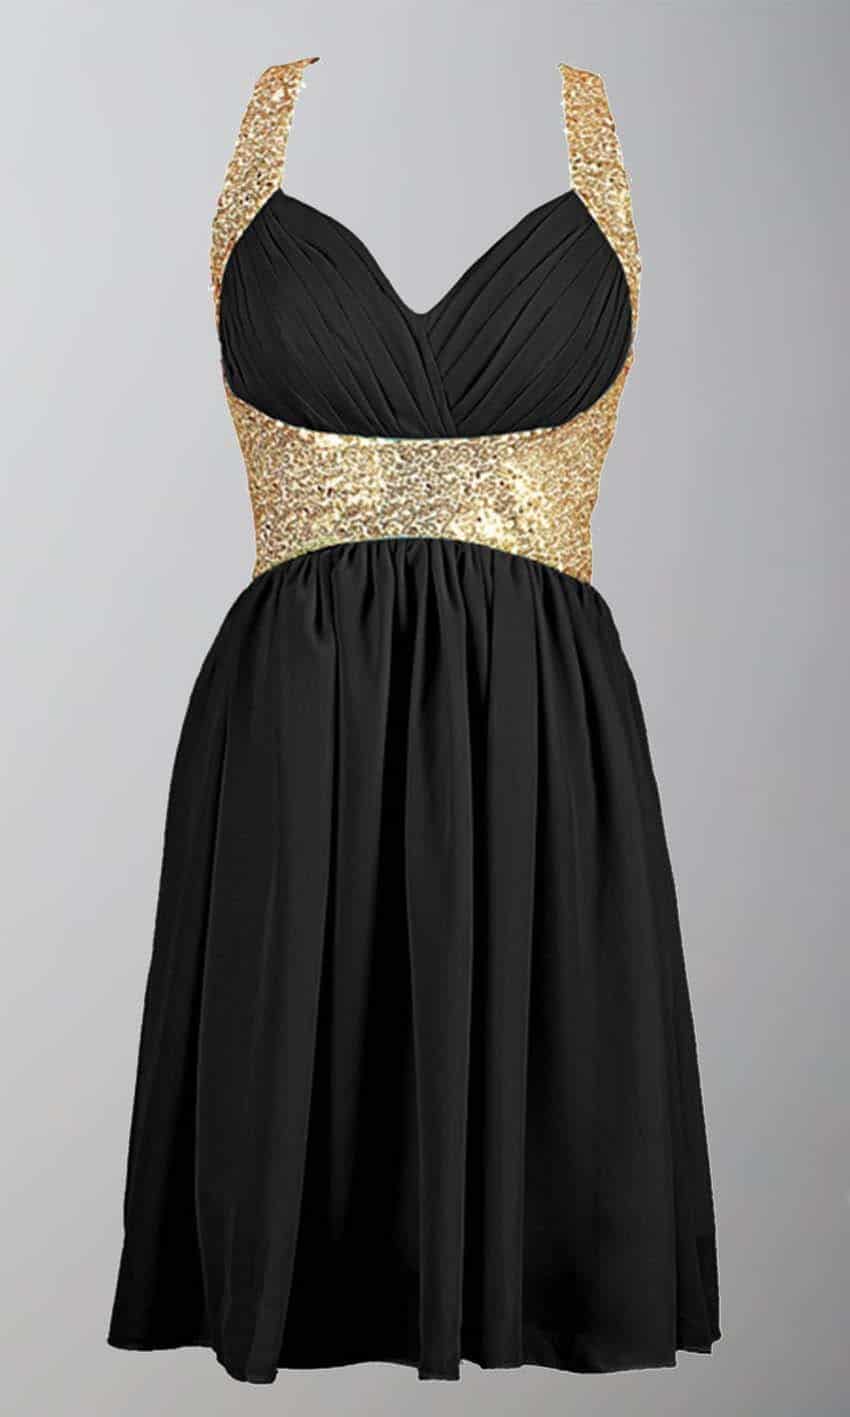 Black and Gold Sequin Short Prom Graduation Dresses with Straps KSP380